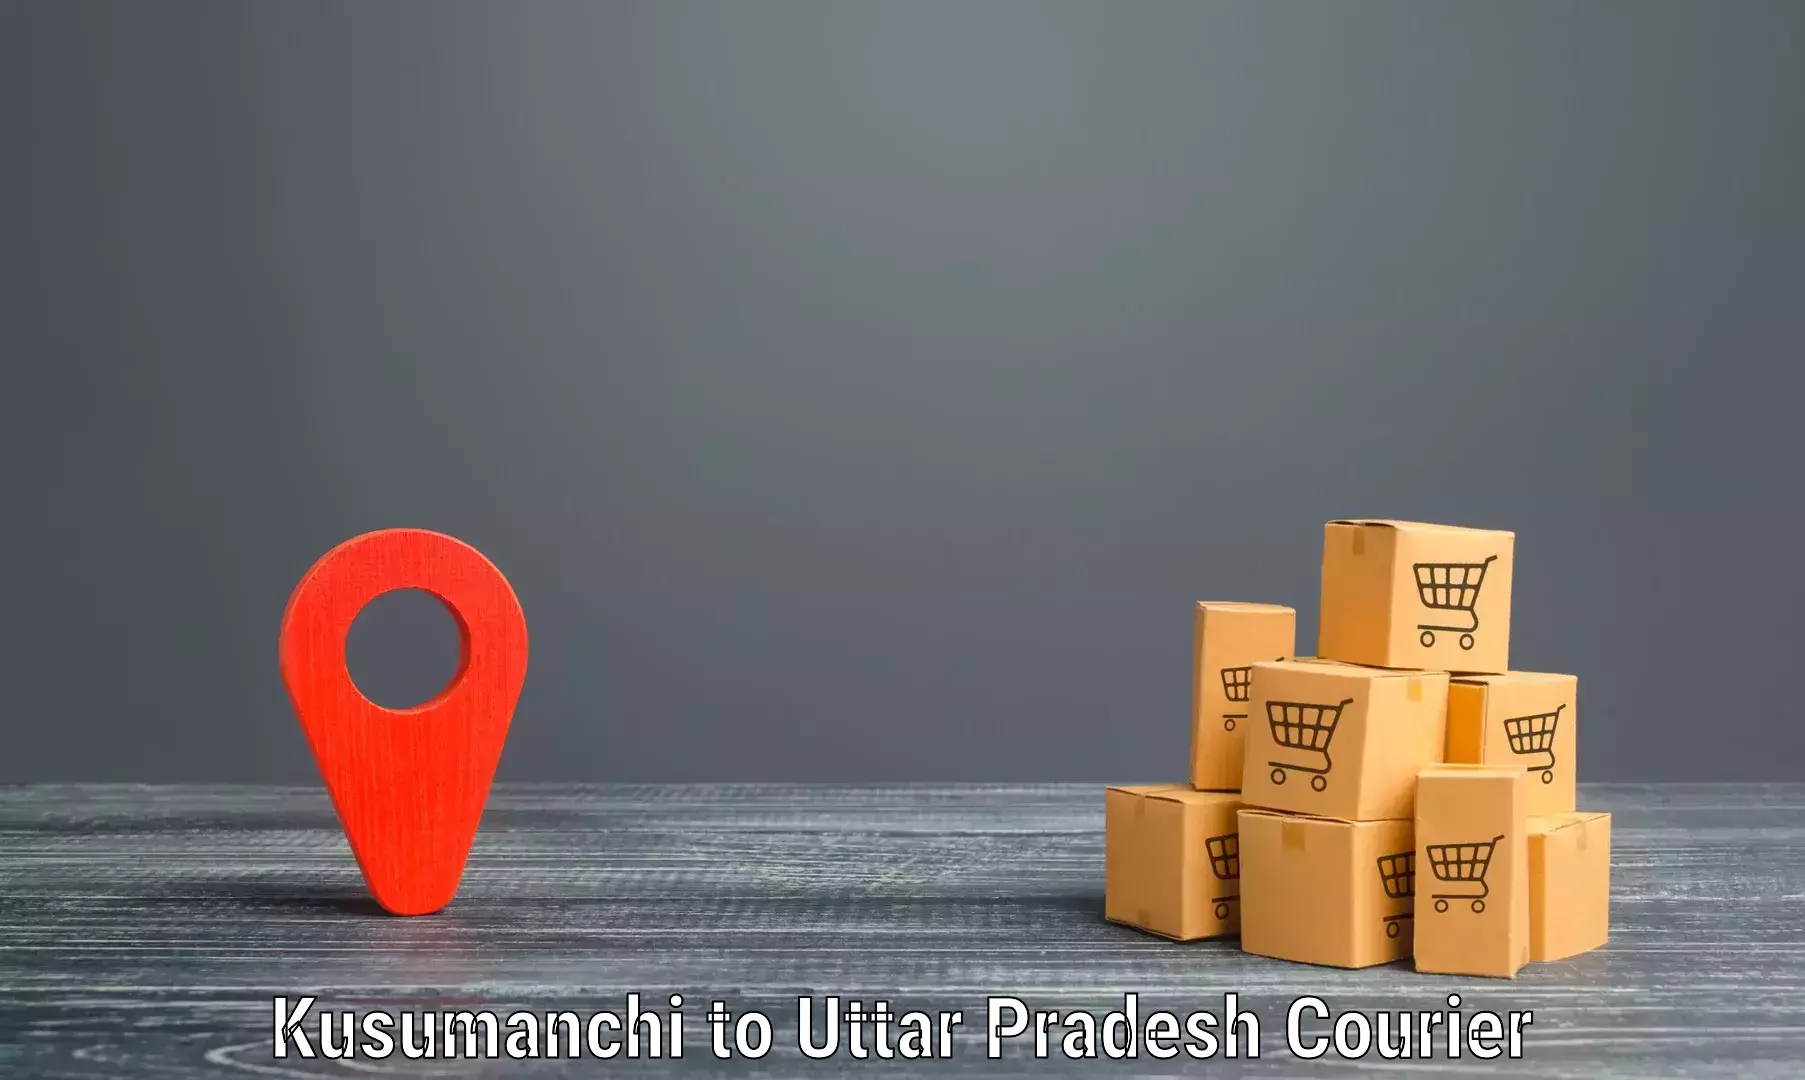 Modern courier technology Kusumanchi to Sitapur